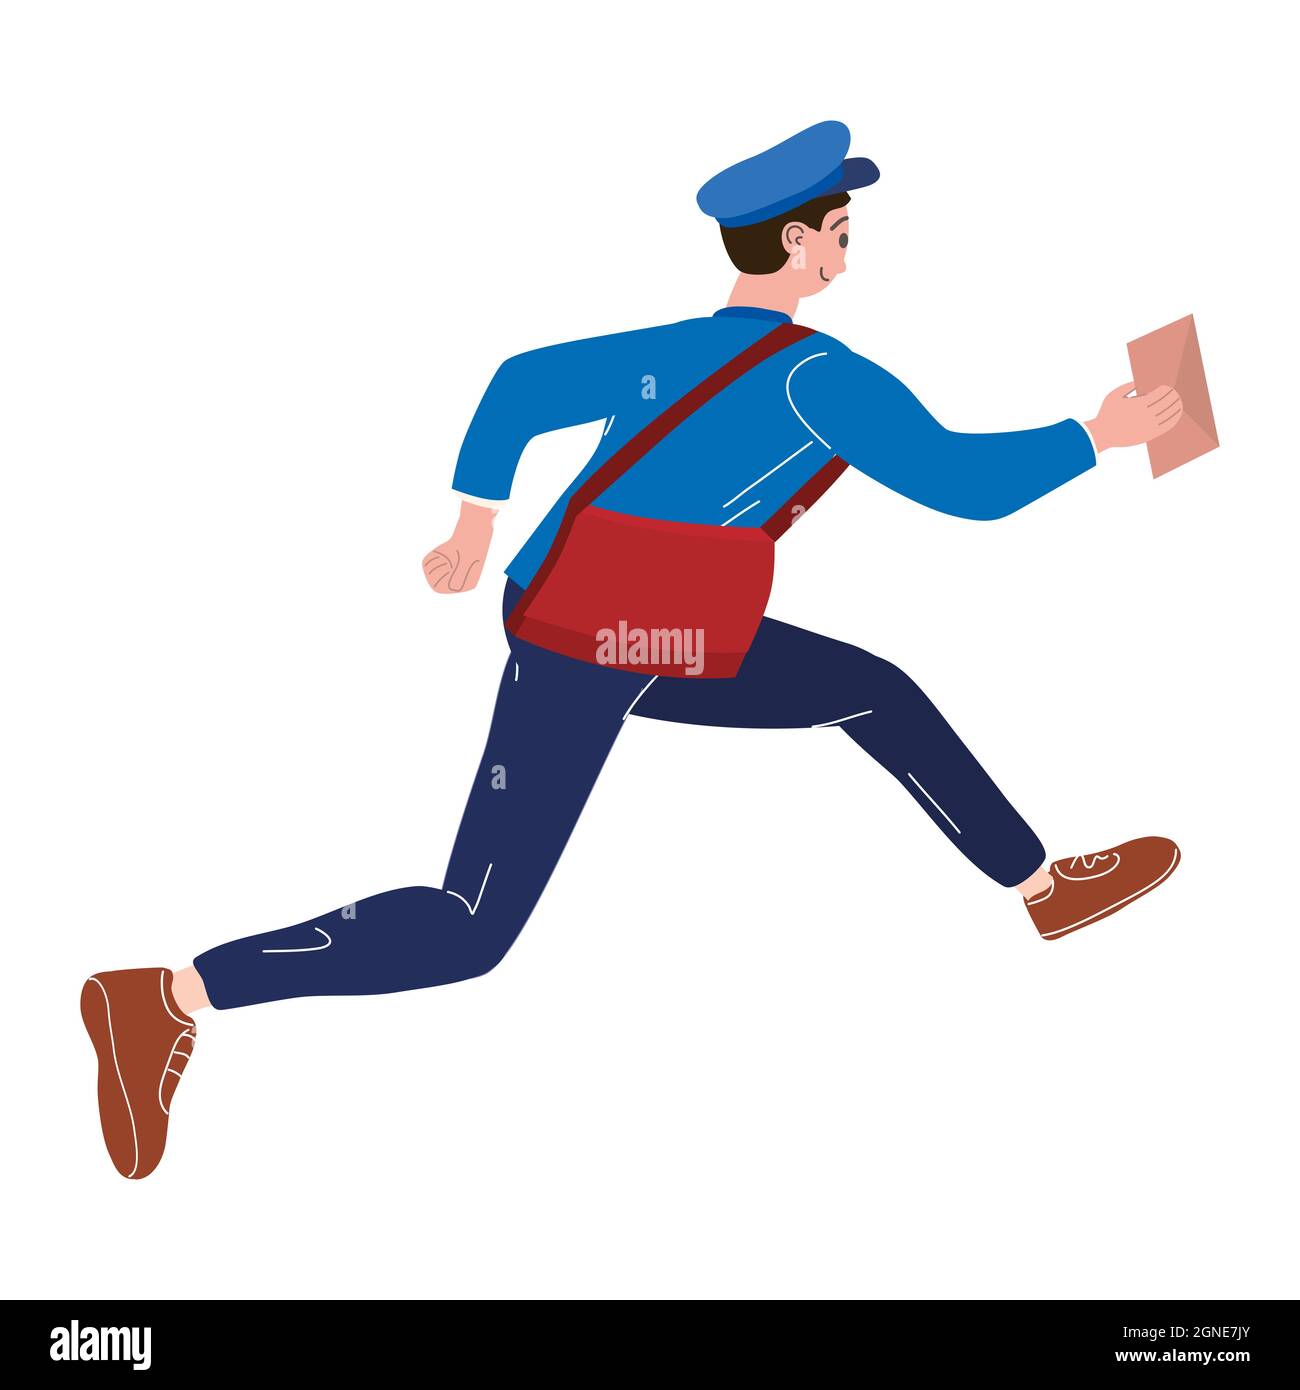 Postman running with bag delivering letter in envelope. Mailman in uniform carrying mail, delivery service. Vector illustration Stock Vector